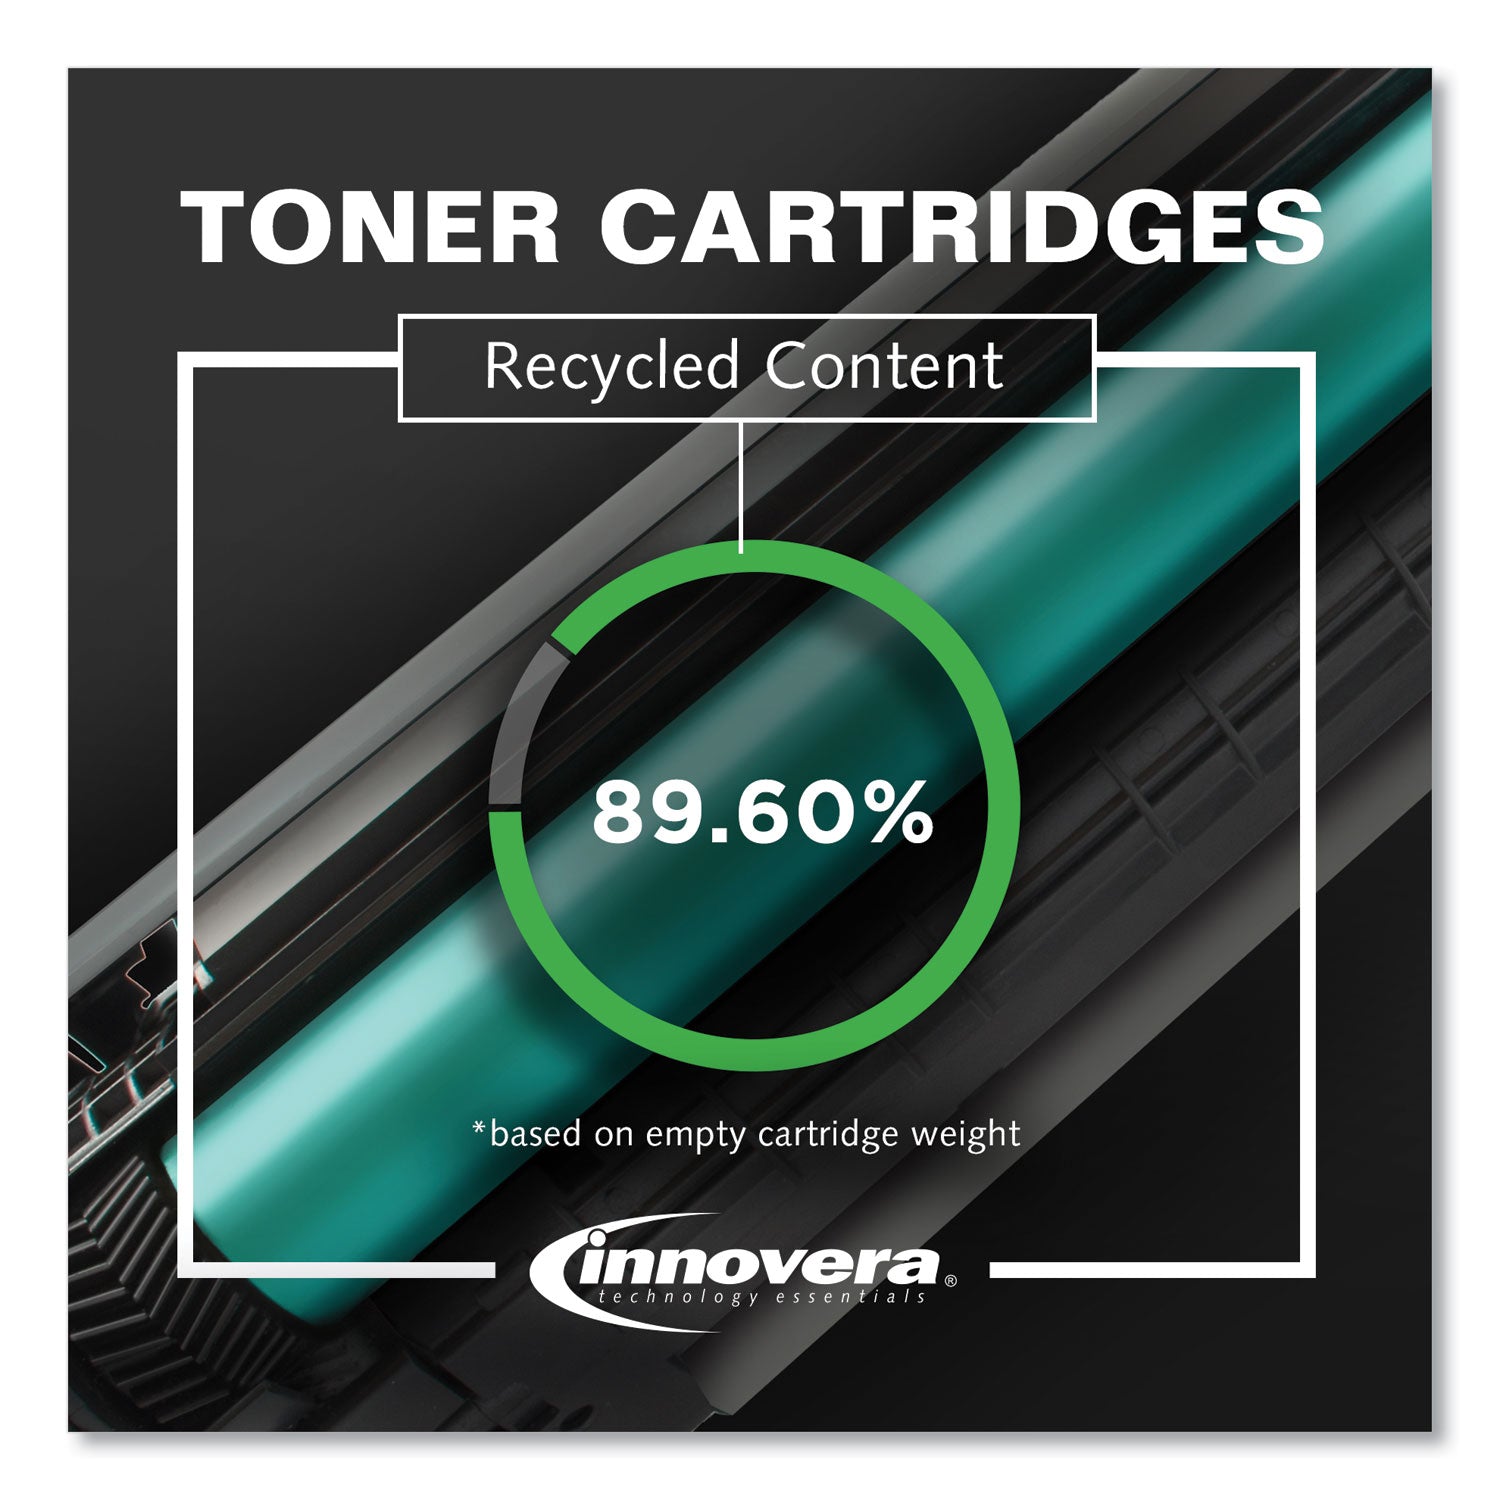 Remanufactured Black Toner, Replacement for 64A (CC364A), 10,000 Page-Yield - 